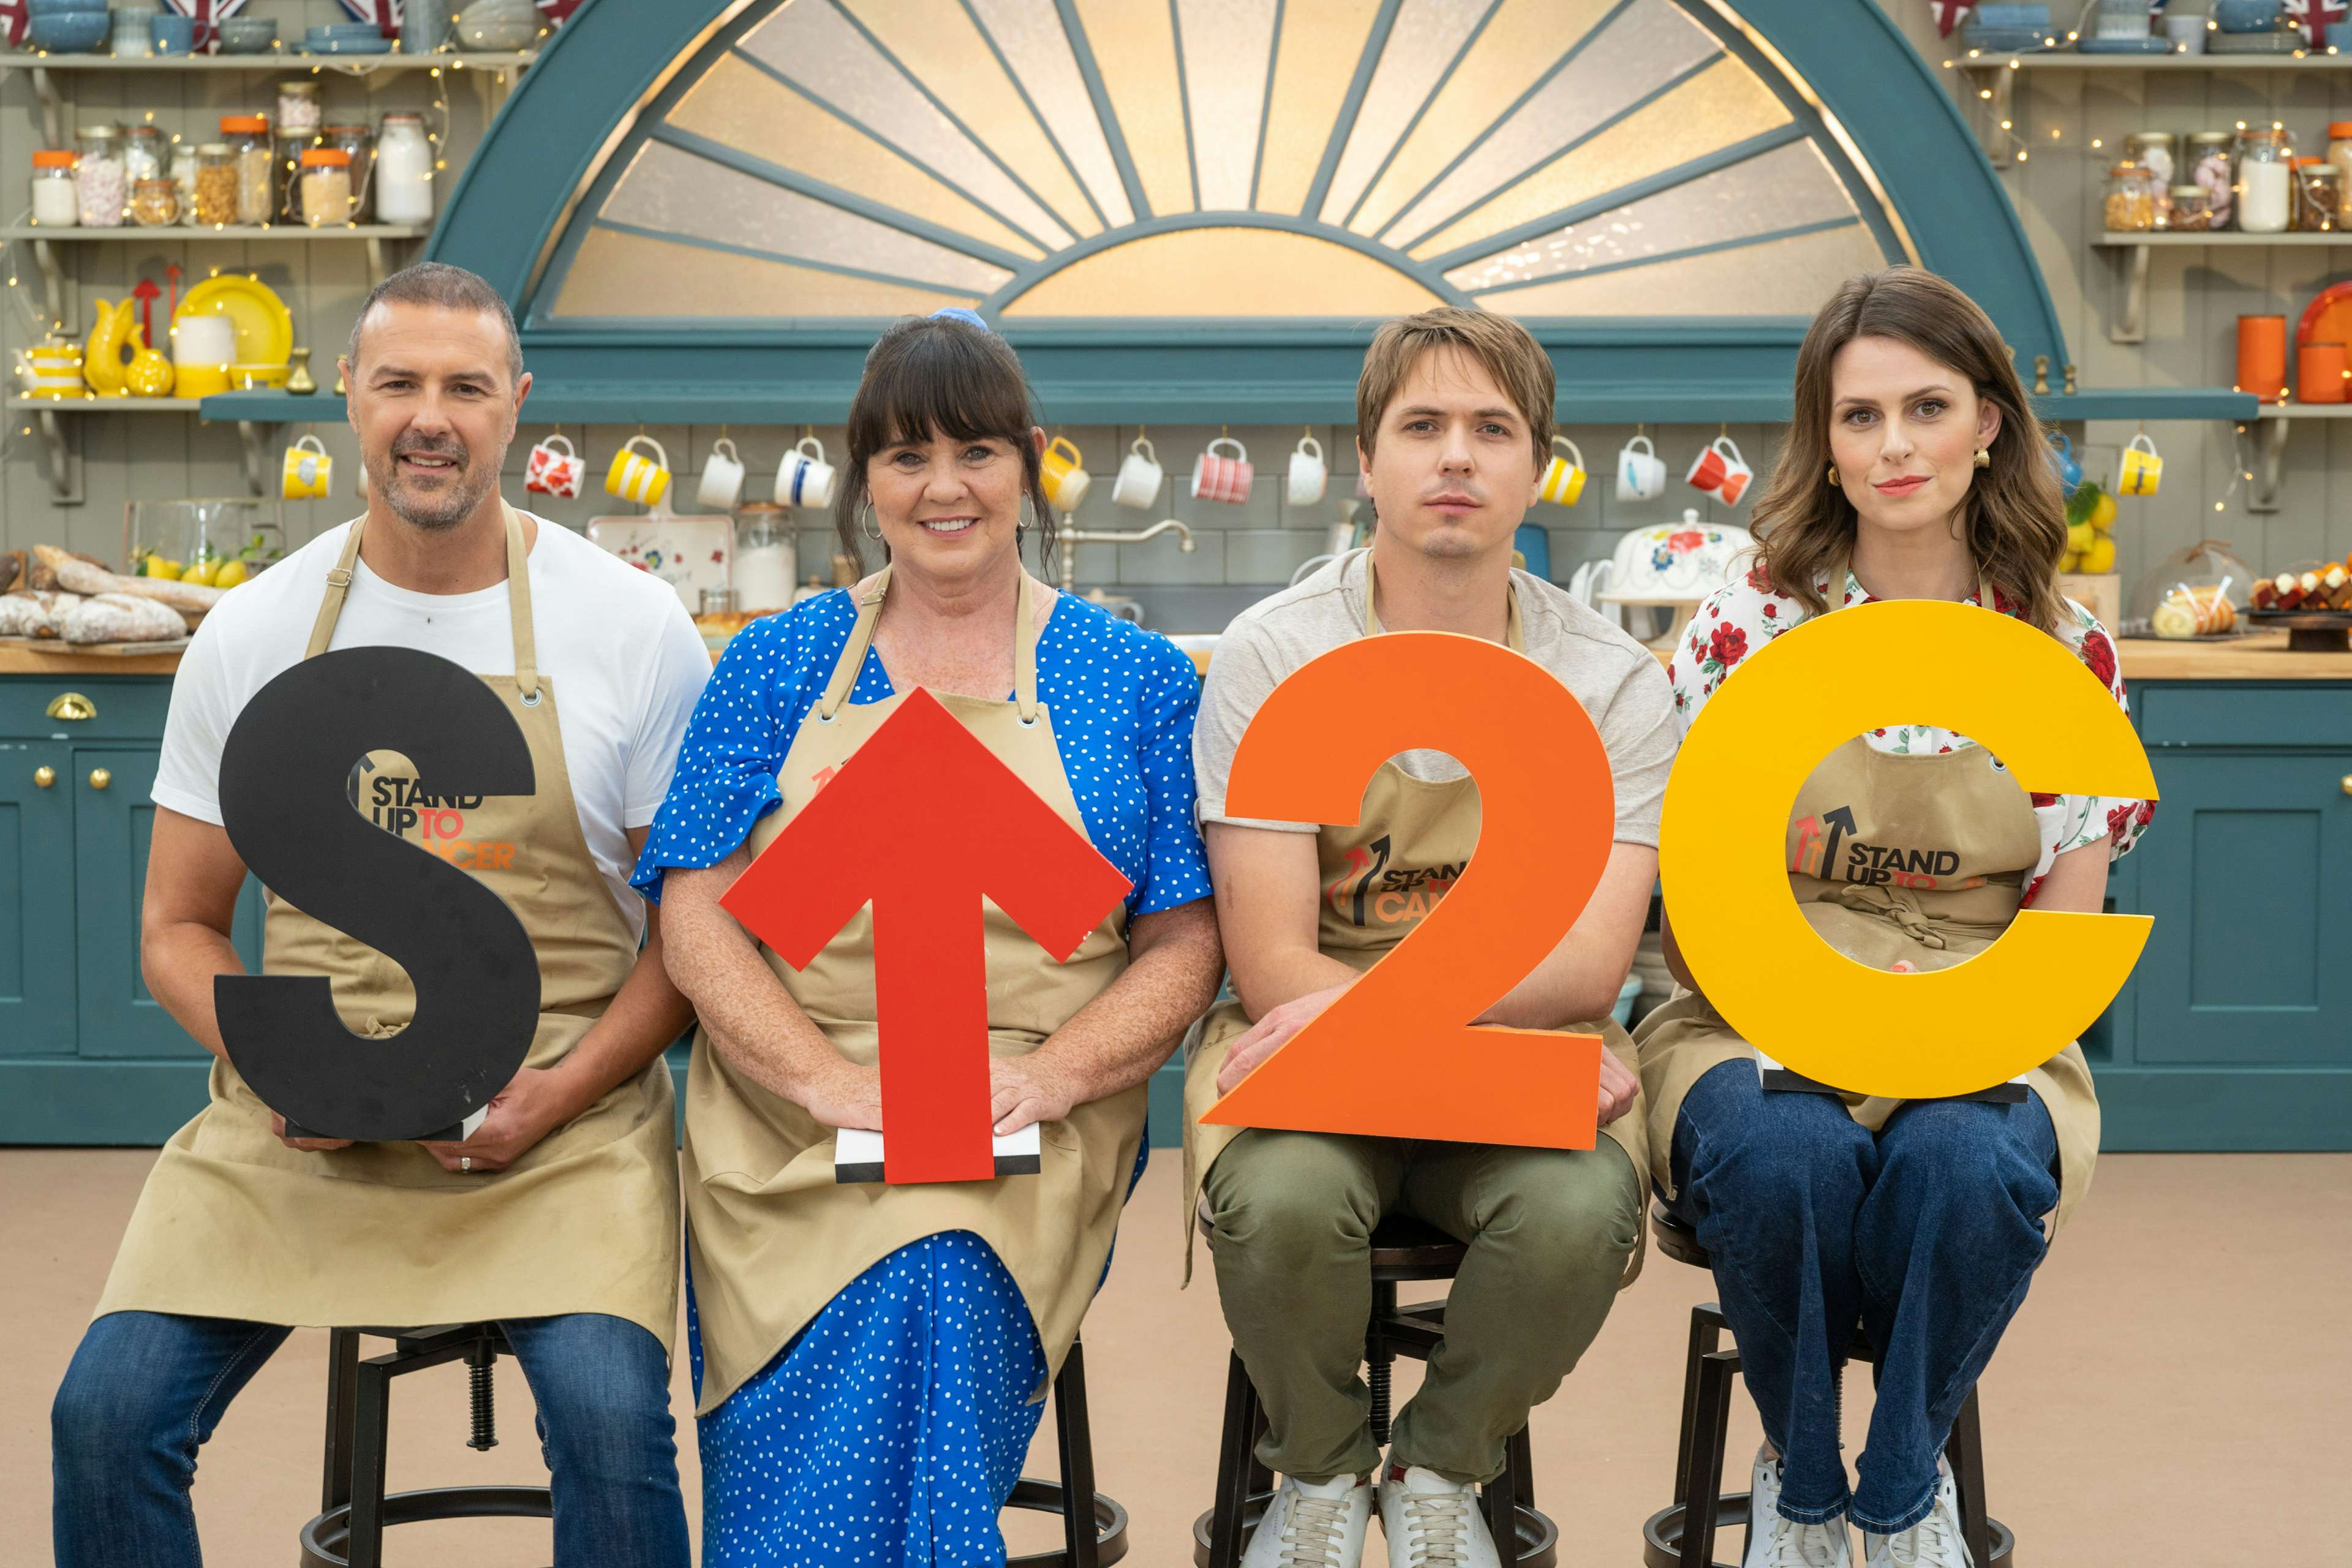 The celebrity contestants for episode 4 of The Great Stand Up To Cancer Bake Off 2023.